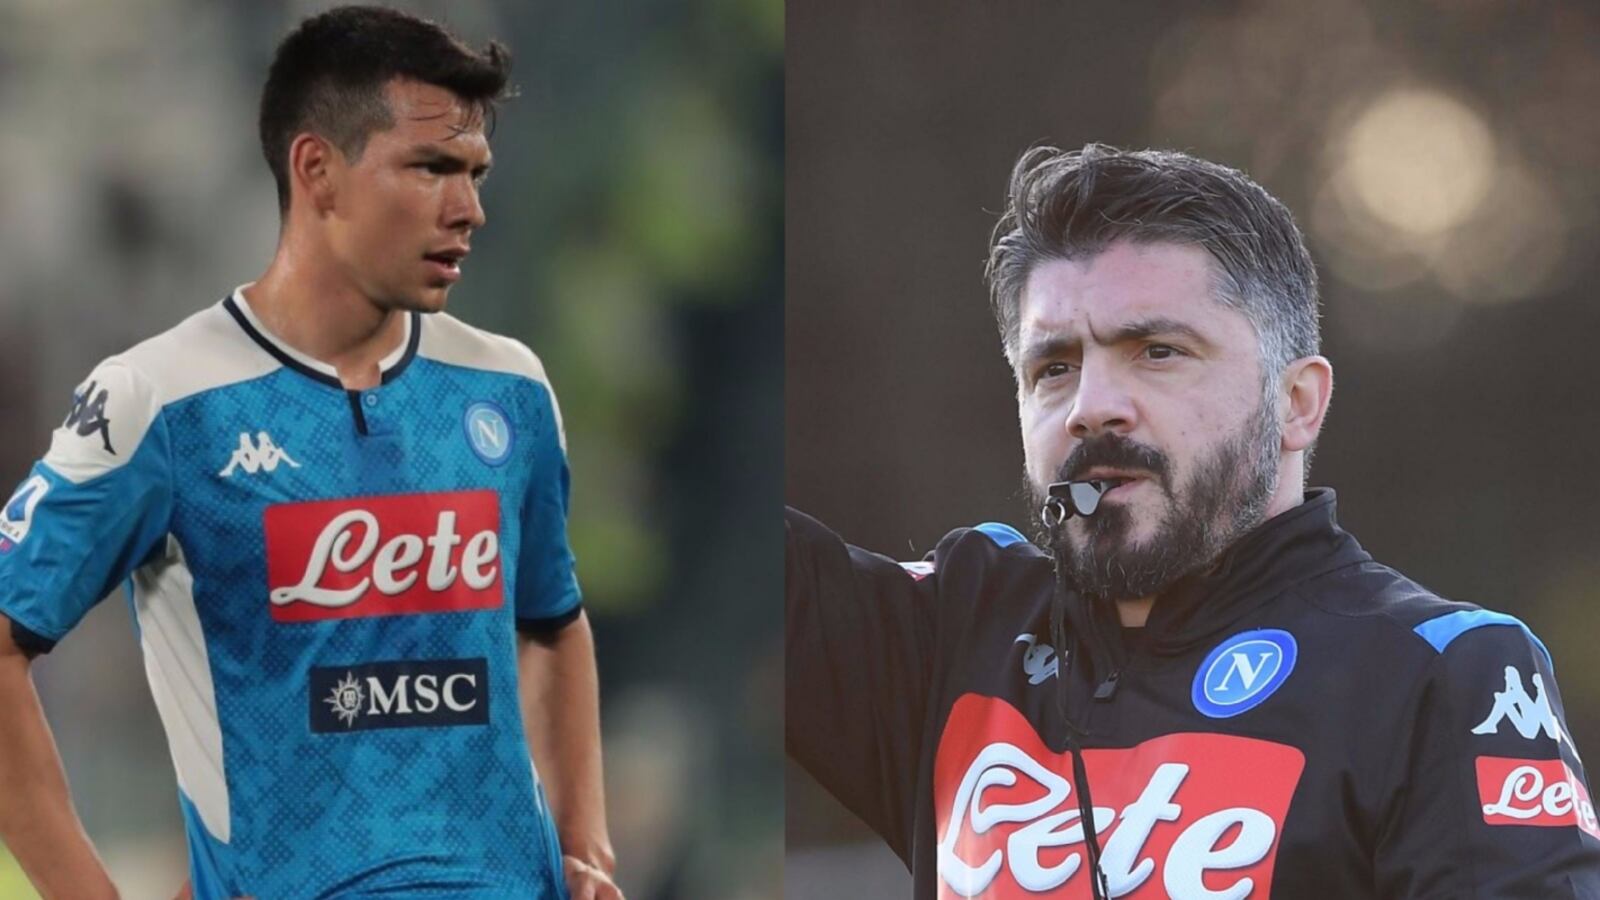 The Napoli player who disobey Gattuso's orders and connects with Hirving Lozano